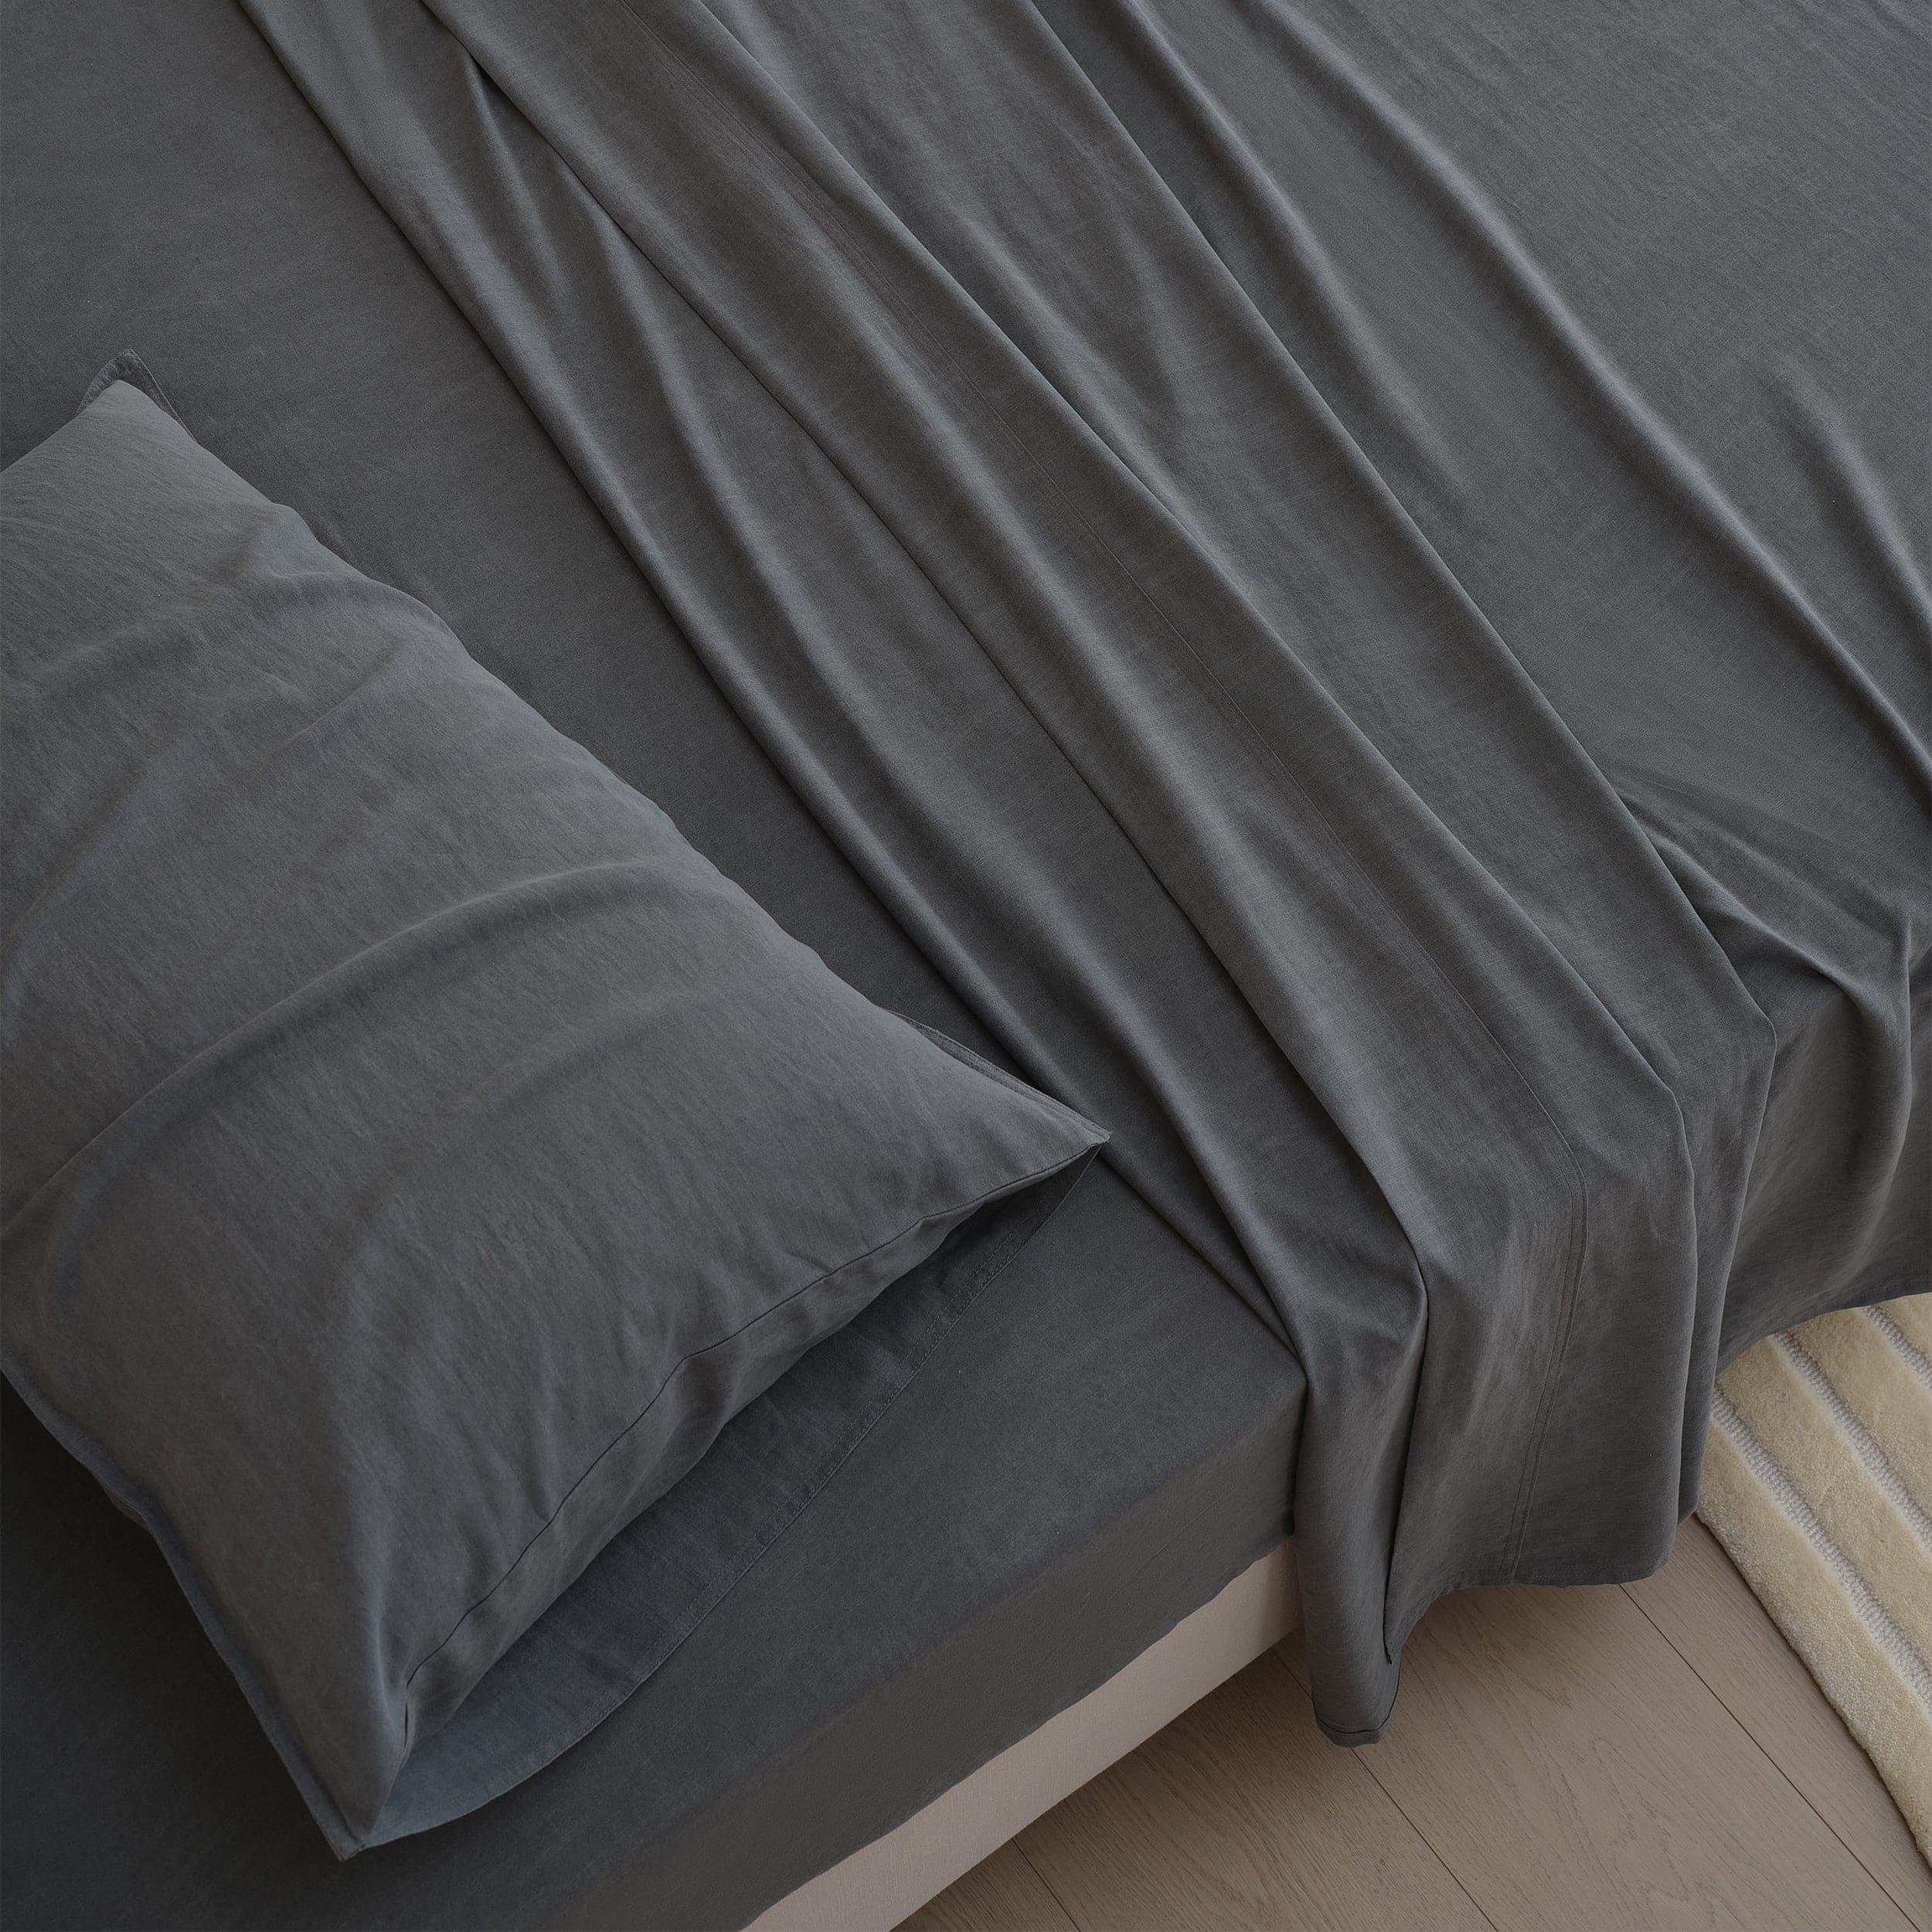 Invest in high-quality queen sheet sets to ensure a restful and peaceful night's sleep.